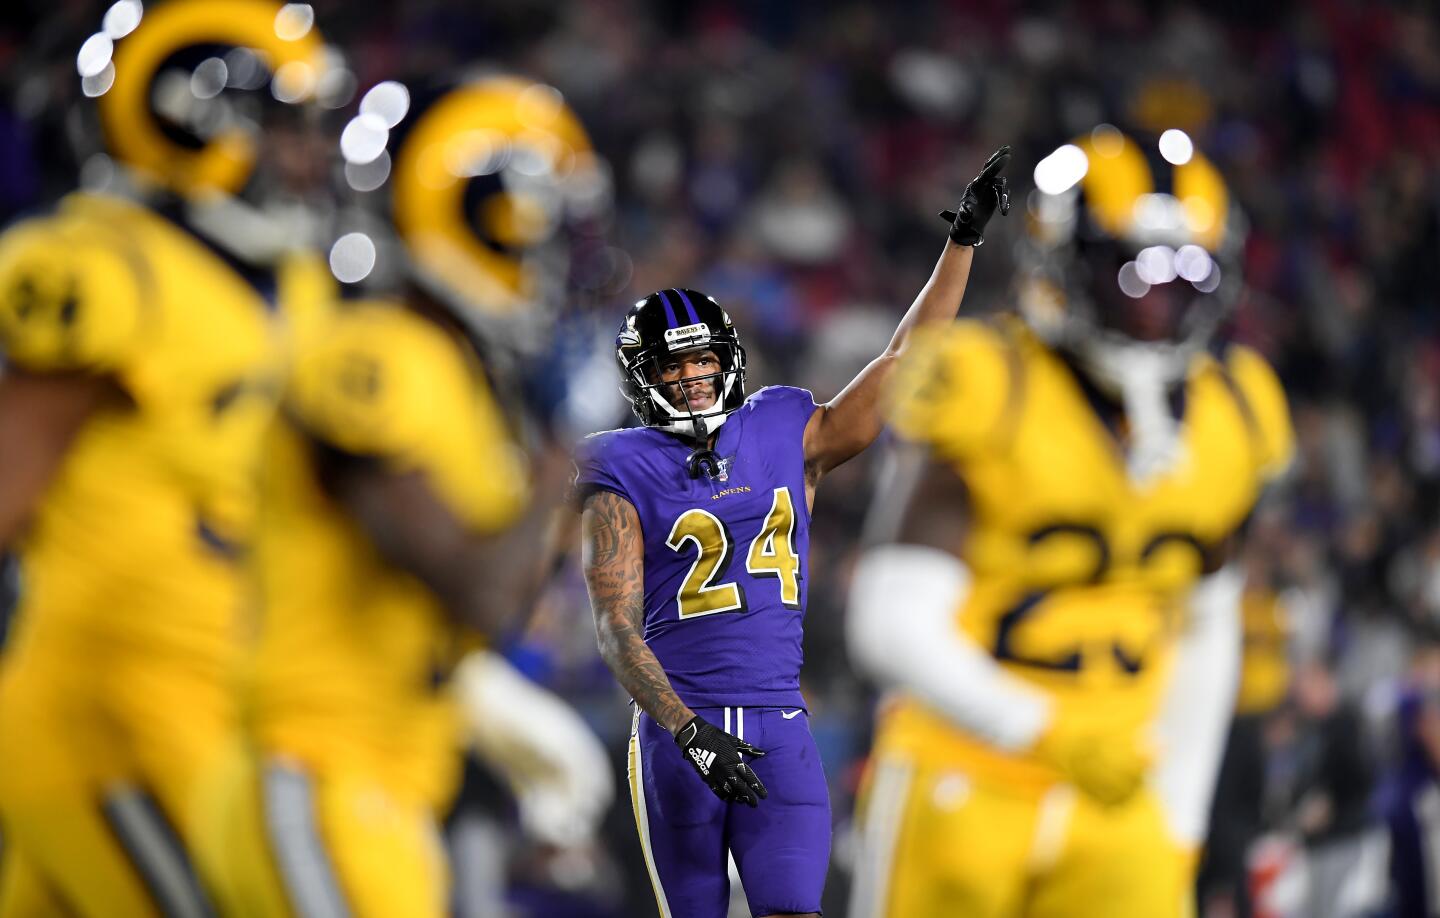 Ravens cornerback Marcus Peters taunts his former team as the Rams come off the field during the fourth quarter of a game Nov. 25 at the Coliseum.